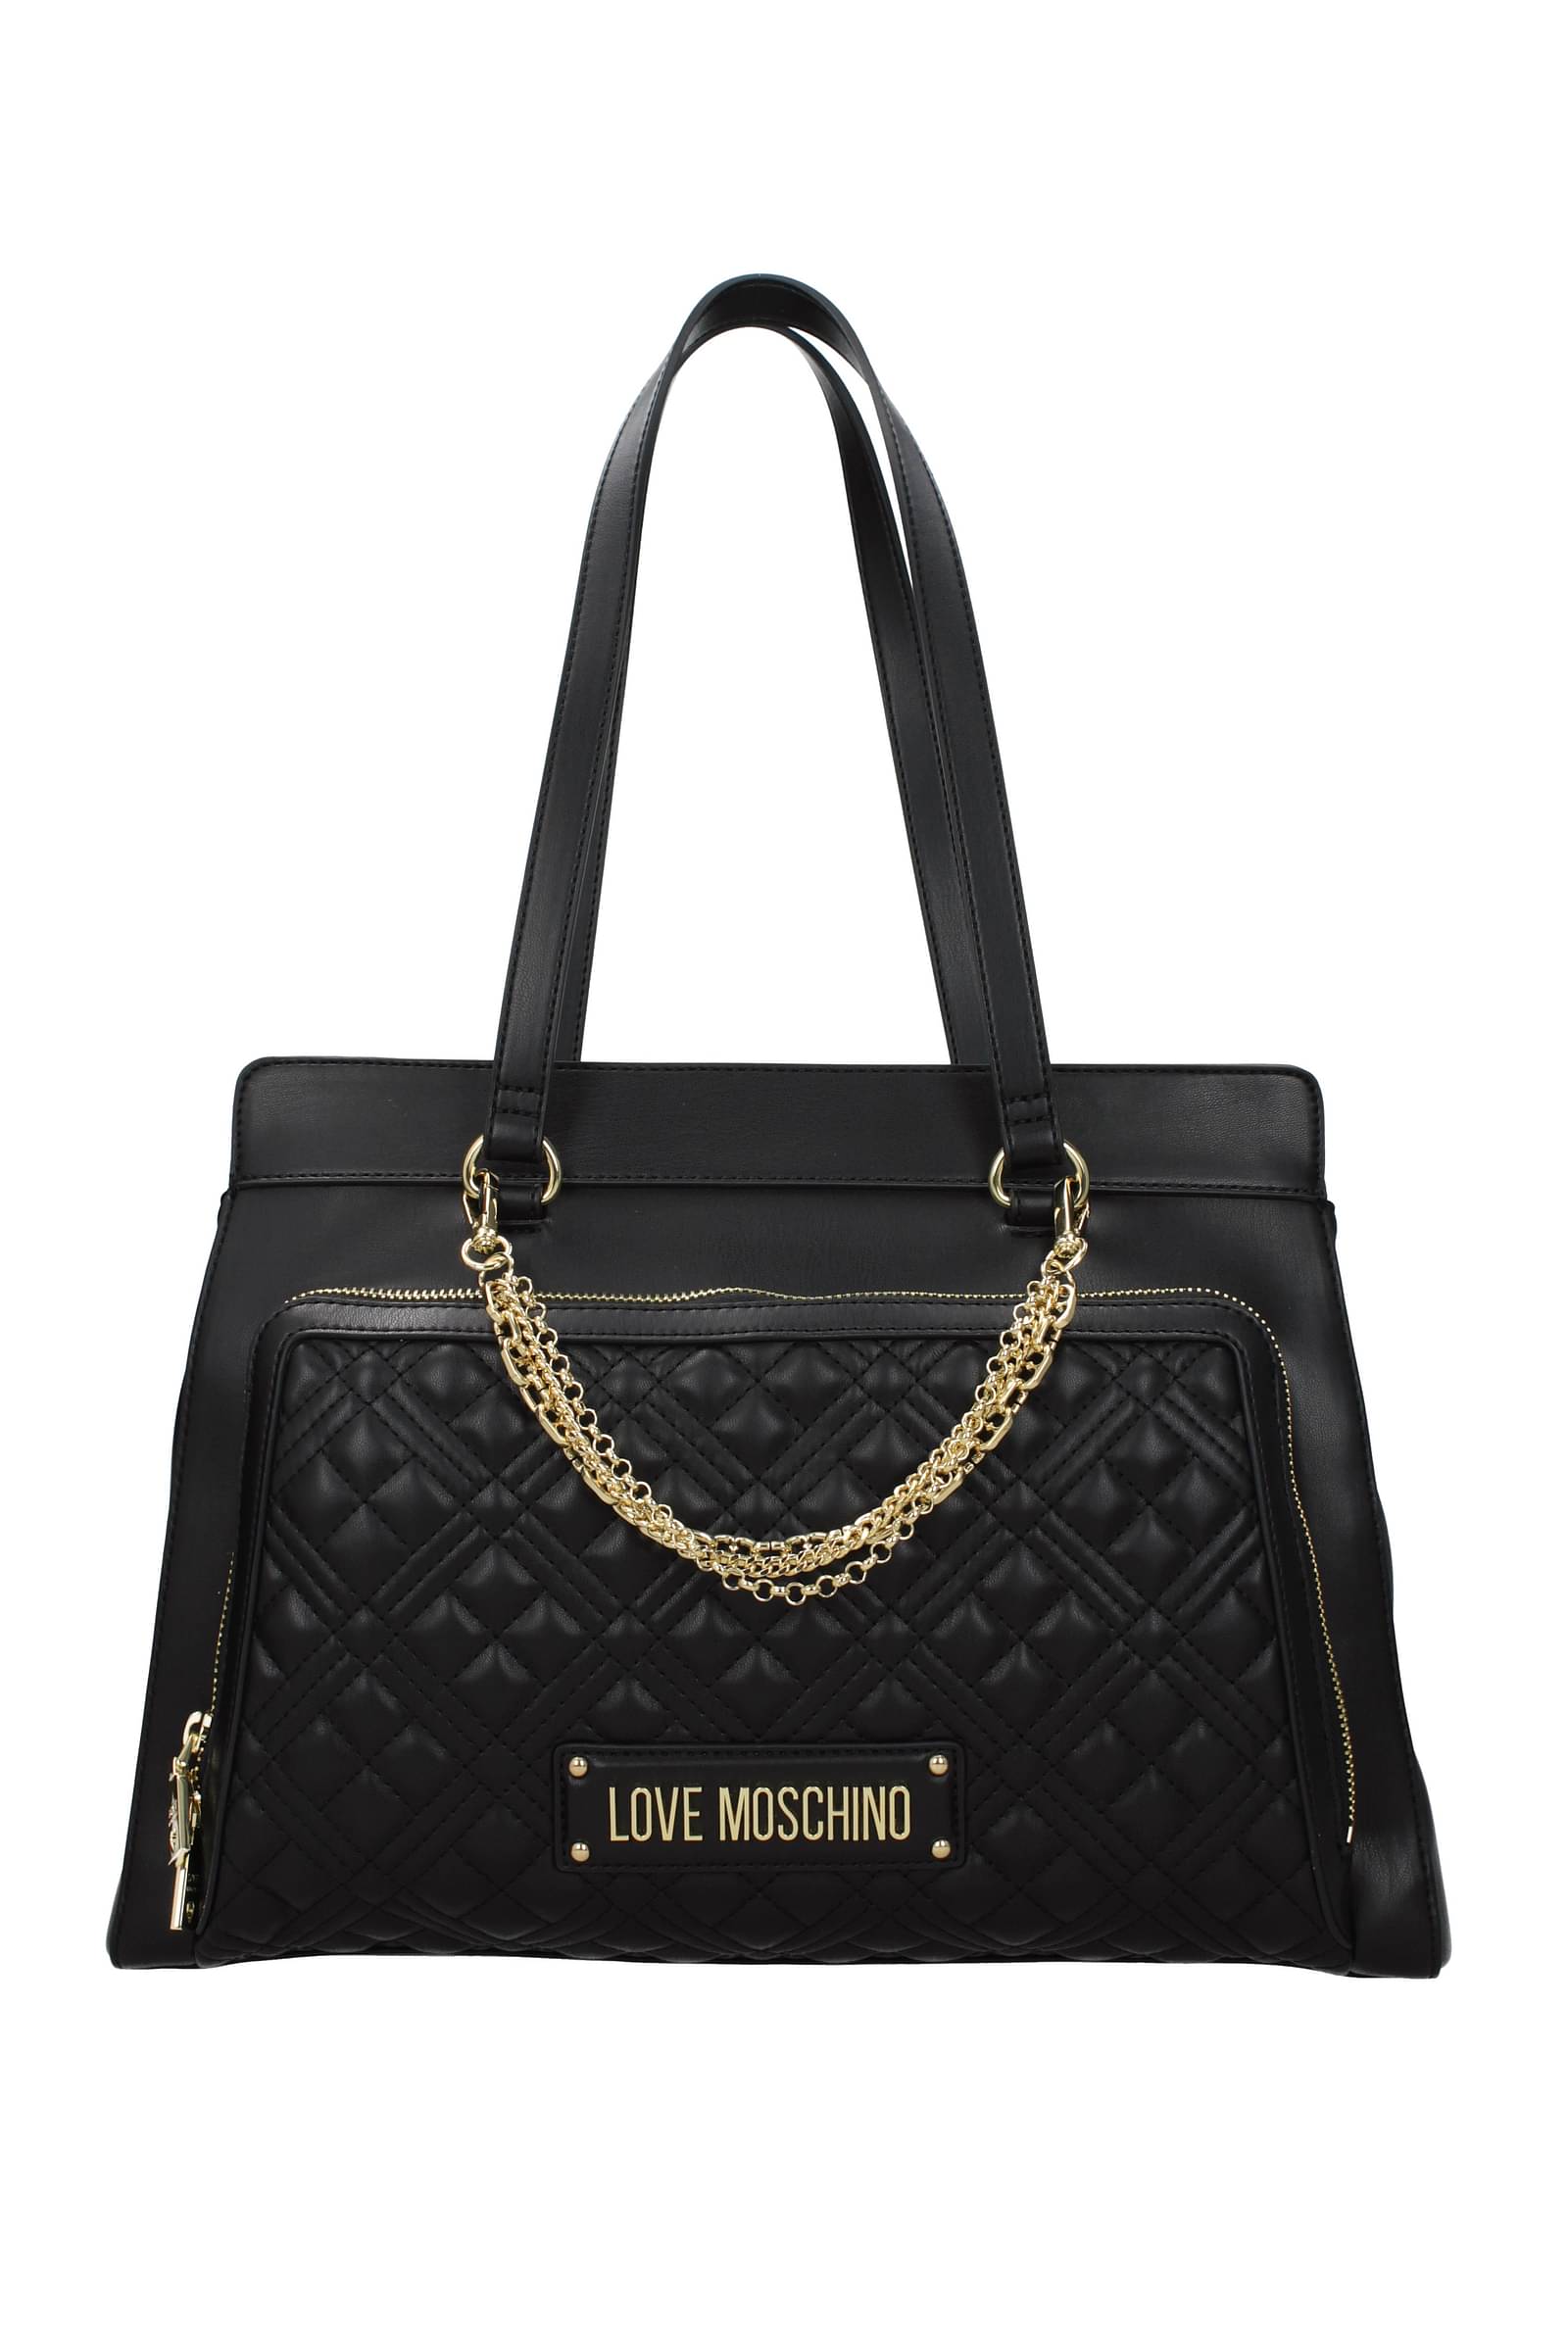 Moschino United States | Moschino® Official Online Shop